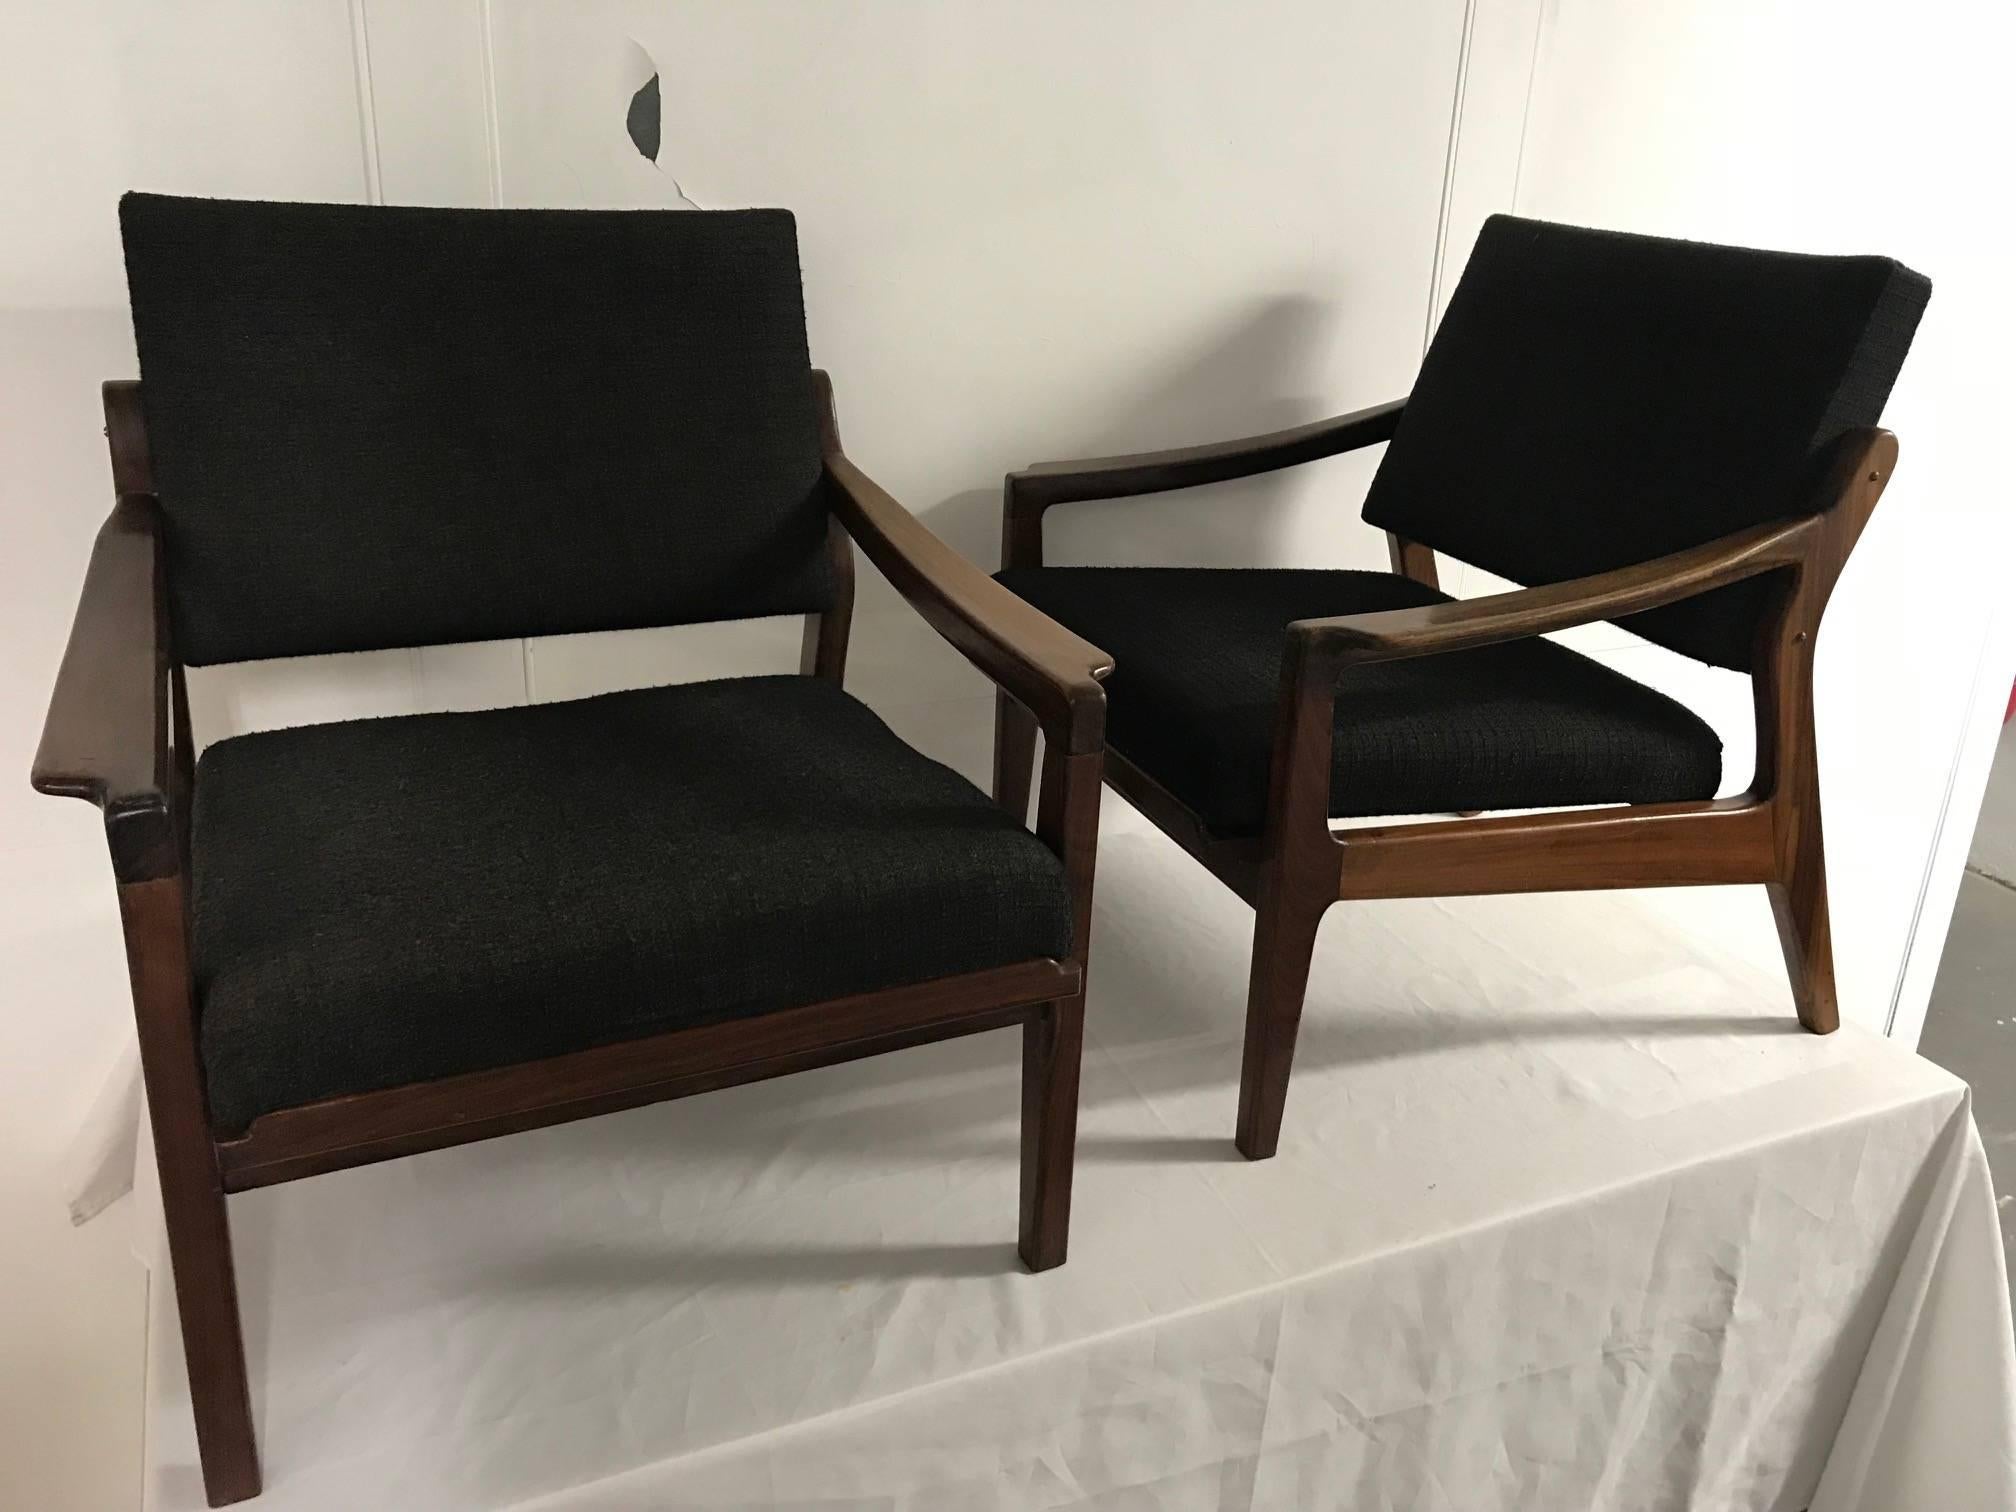 Pair of armchairs for the Altamira company, Portugal, 1960s. Pau Santo wood, assimilated to jacaranda.